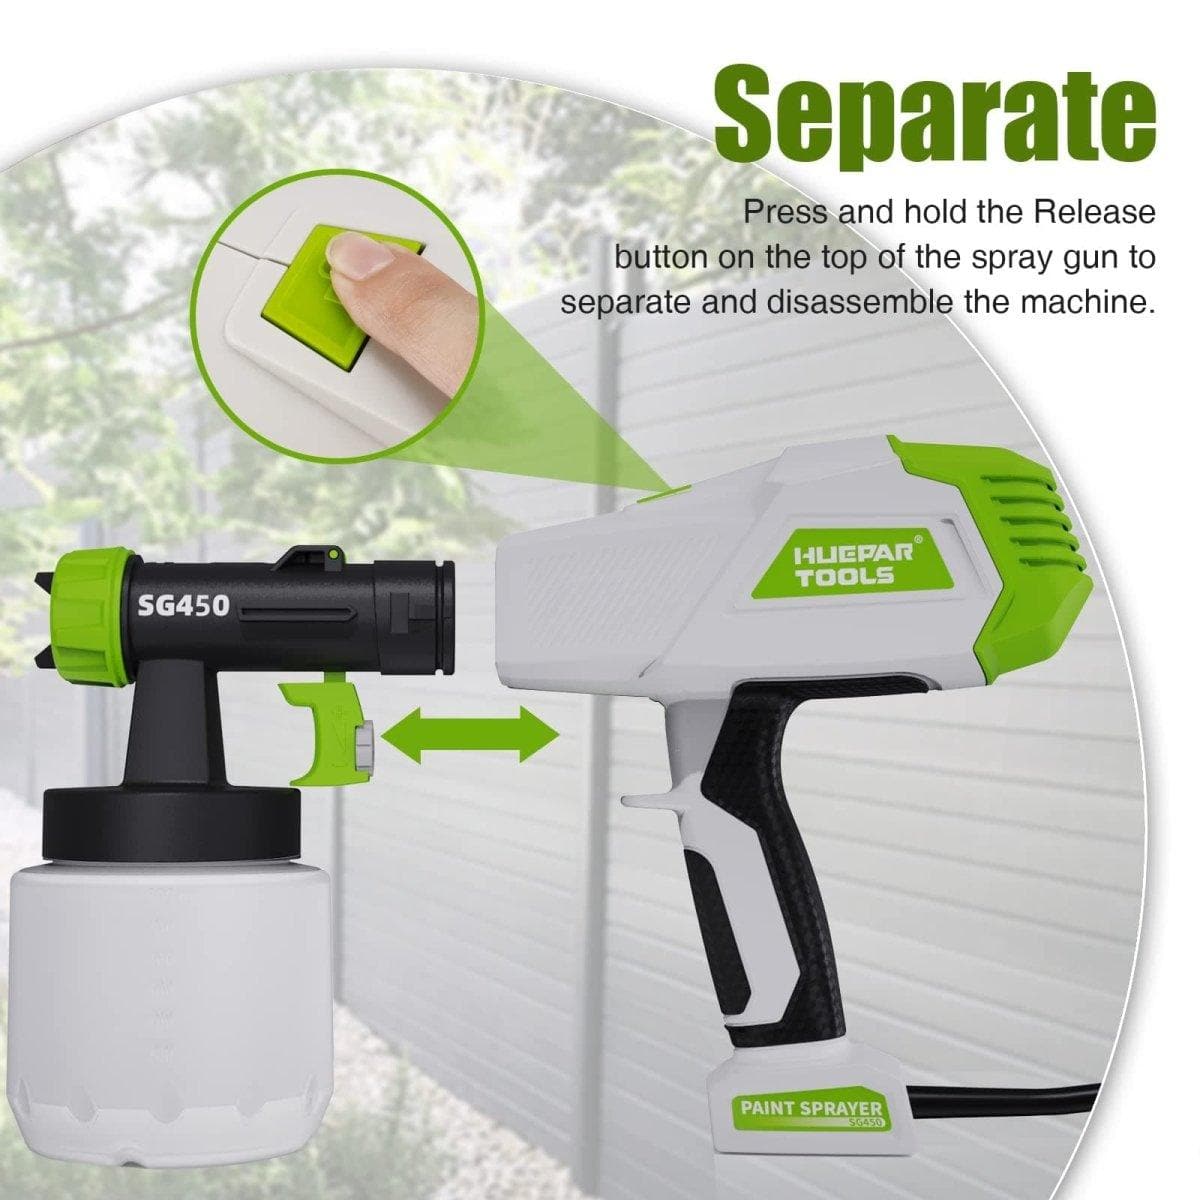 Huepar Tools SG450 HVLP electric paint sprayer with 800ml capacity and 3 metal nozzles, suitable for home interior and exterior walls, ceiling, cabinet, fence, and chair spraying7